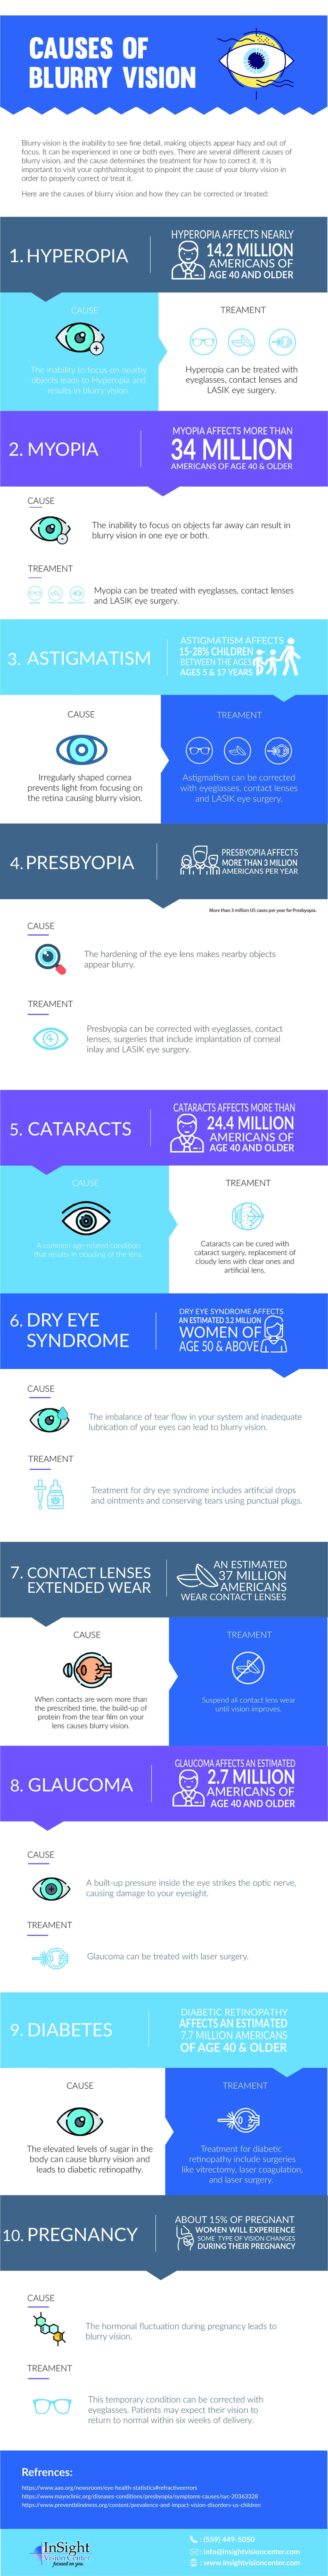 Causes and treatment for blurry vision infographic